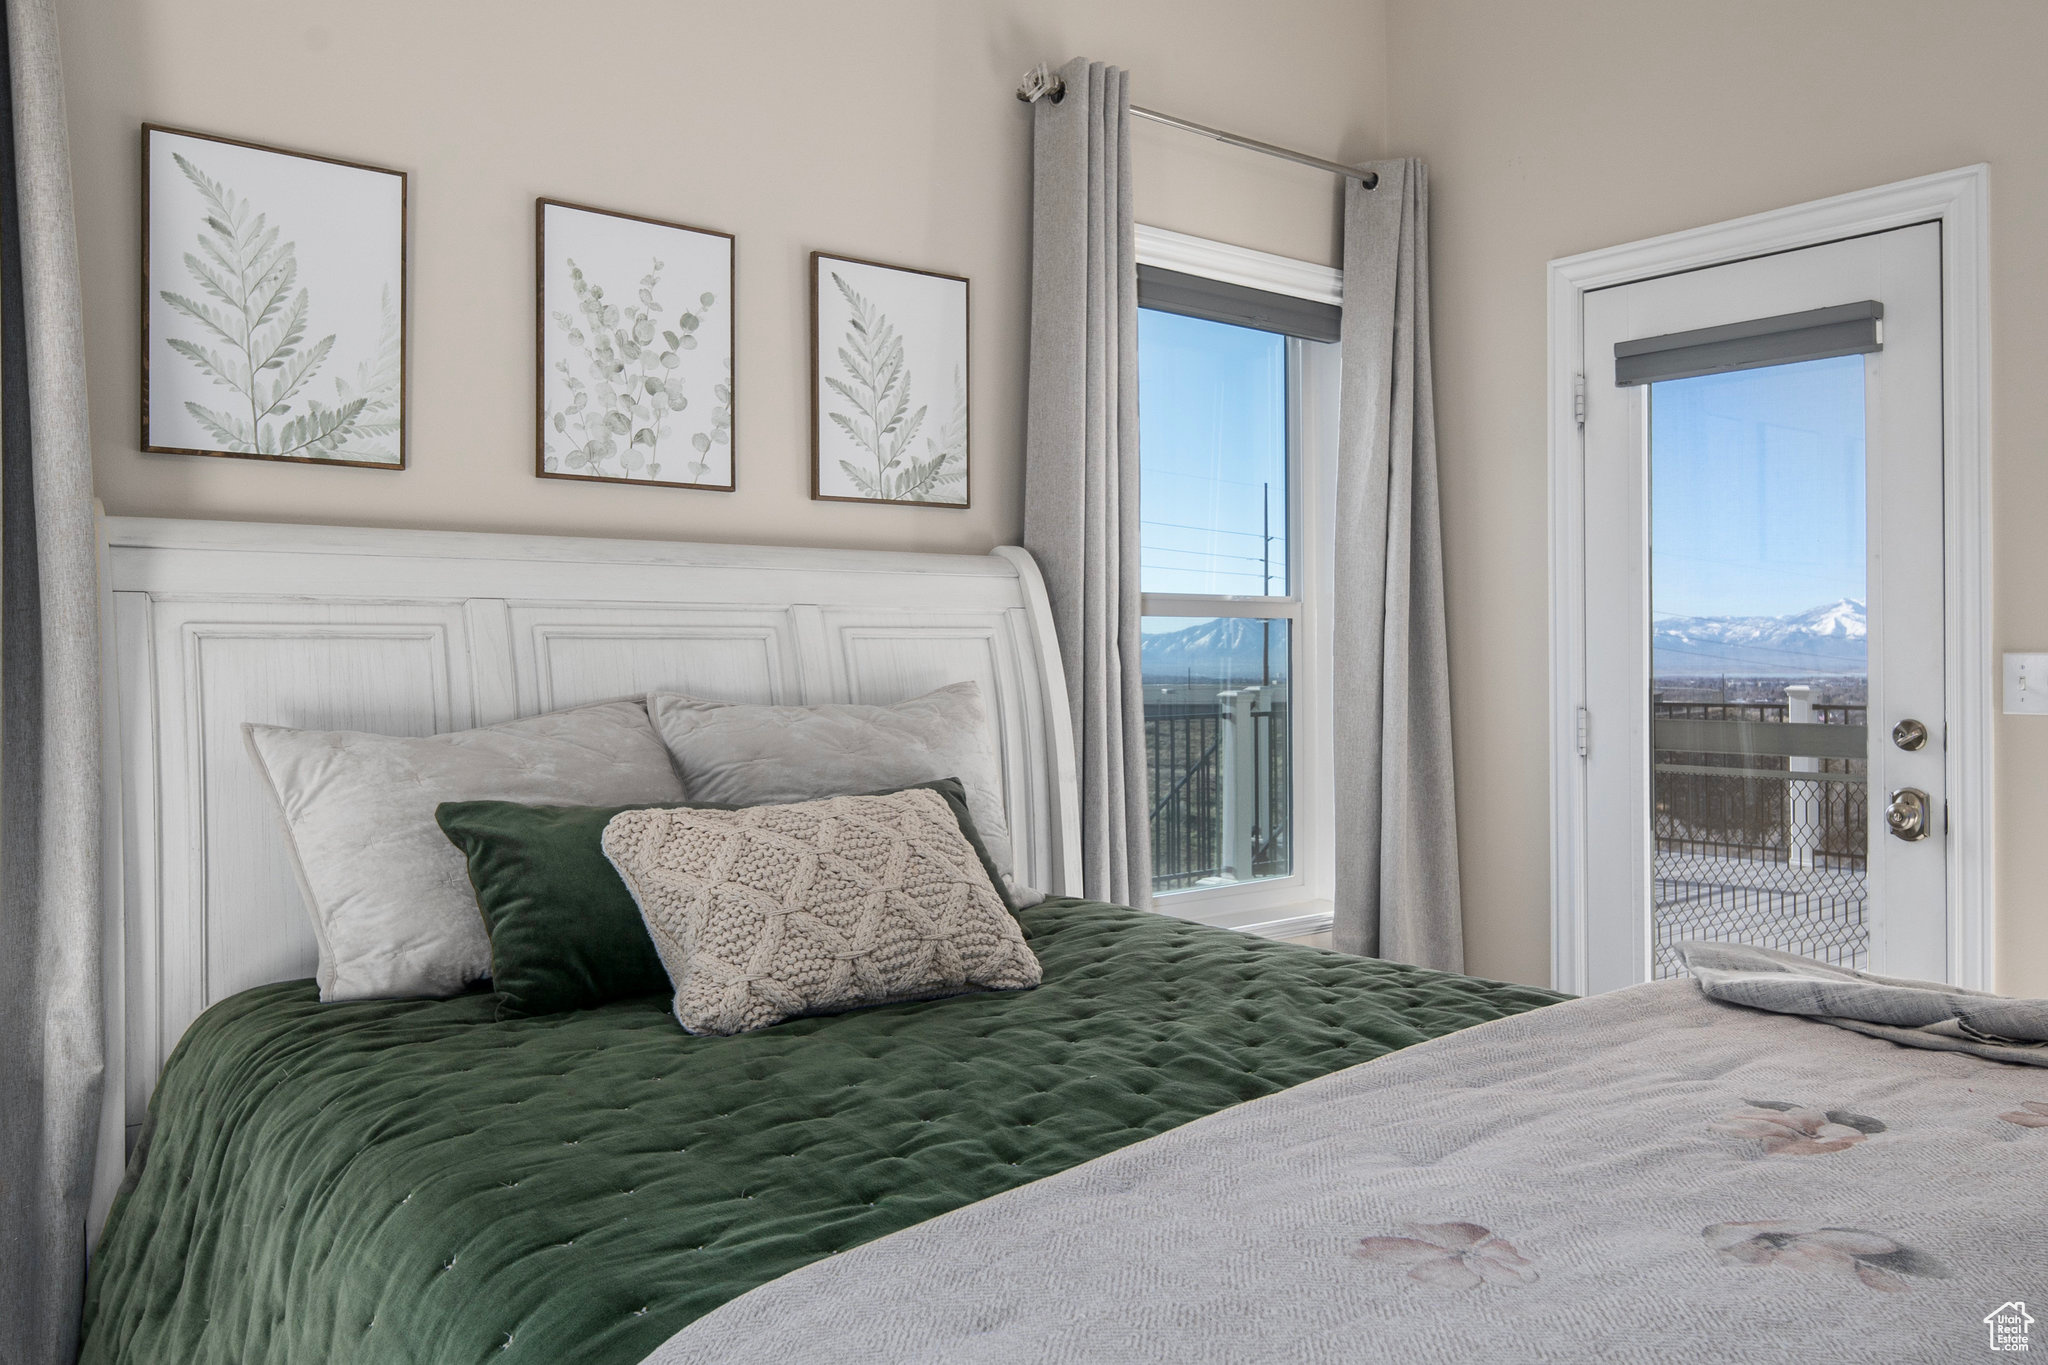 Primary Bedroom Oasis with private access to the wrap around deck. Wake up enjoying the views.